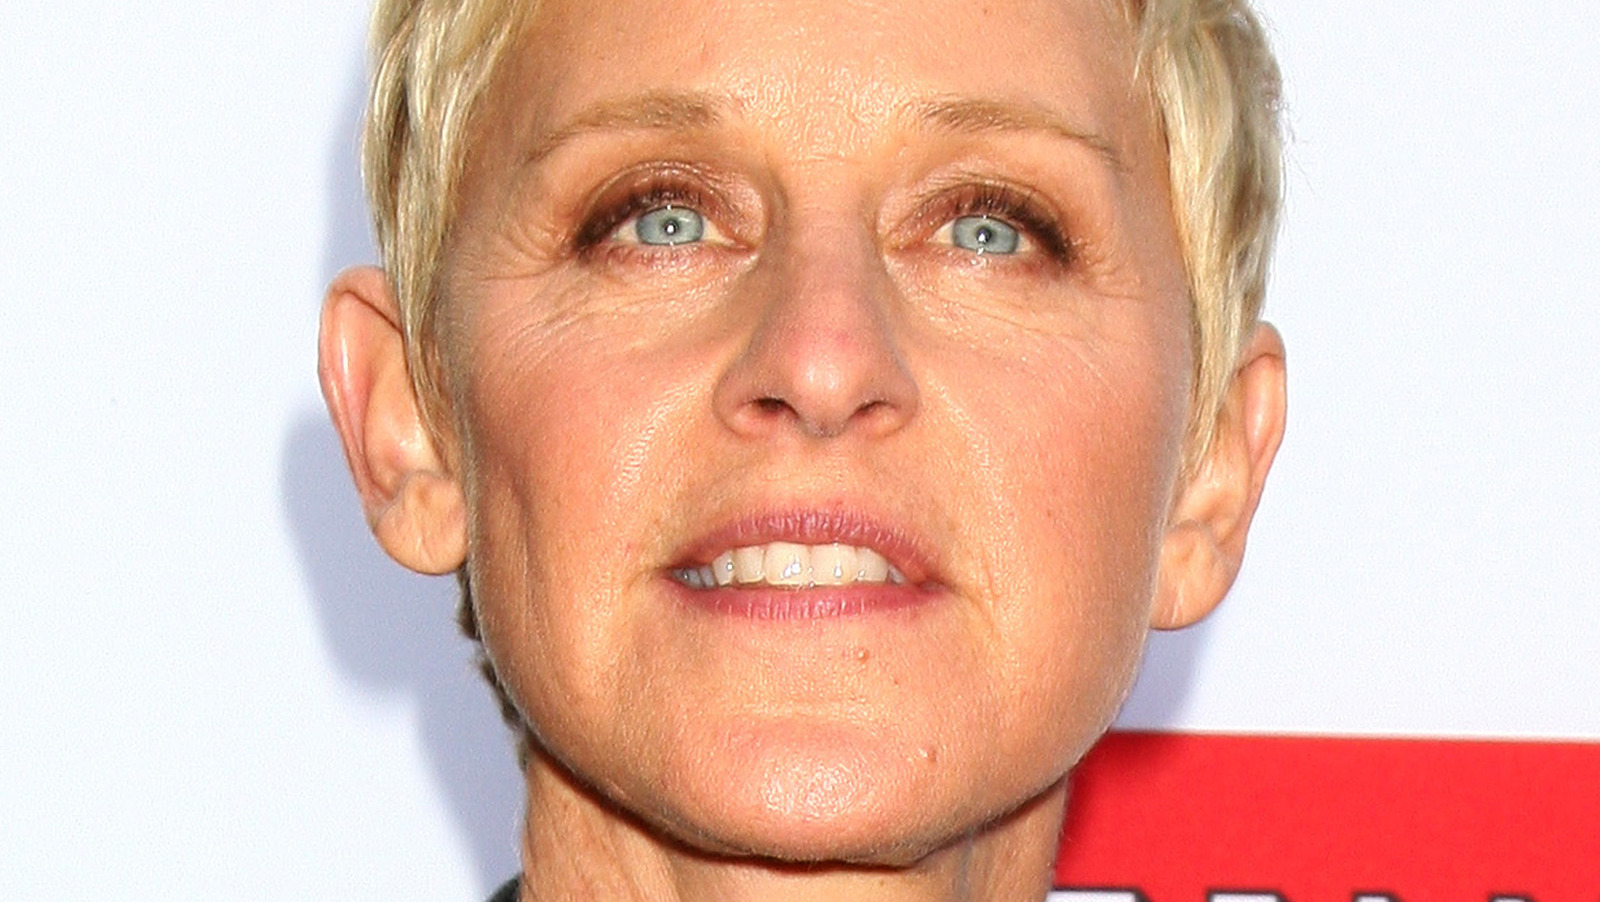 Ellen DeGeneres’ Very First Guest Will Make A Special Appearance In Her Final Show